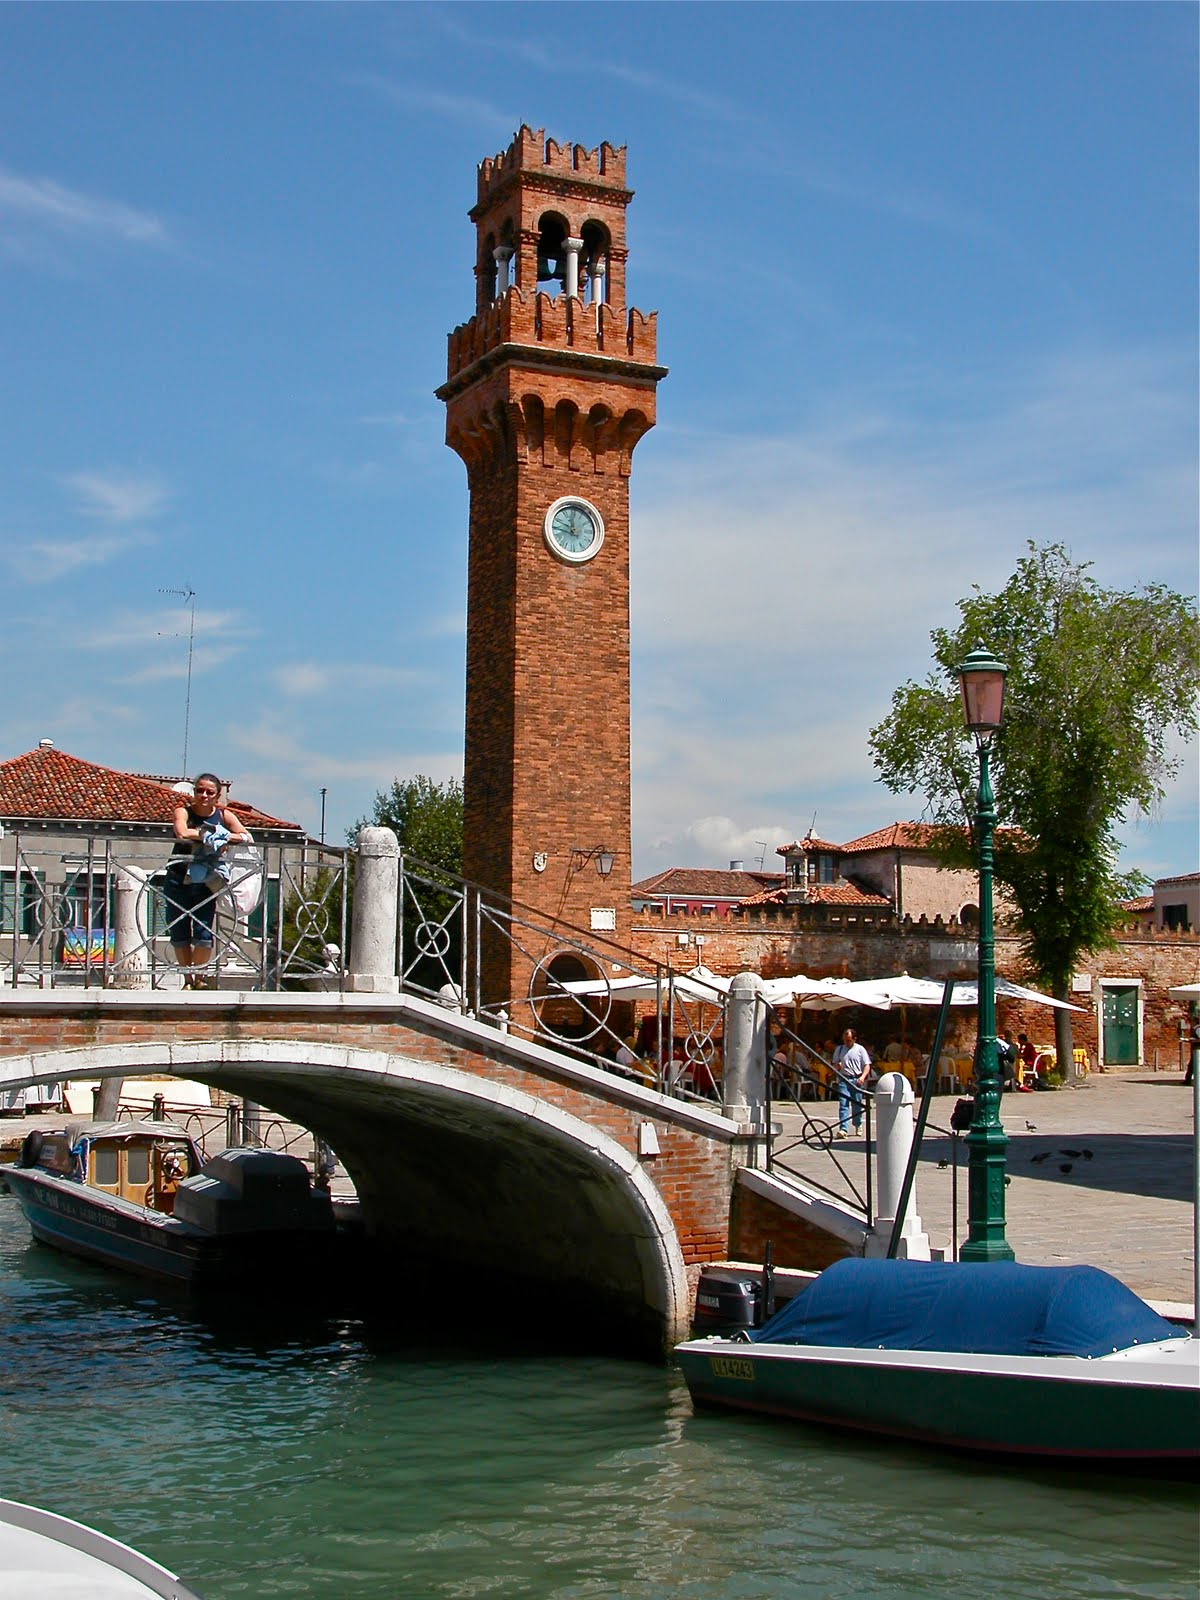 central piazza in Murano, Italy